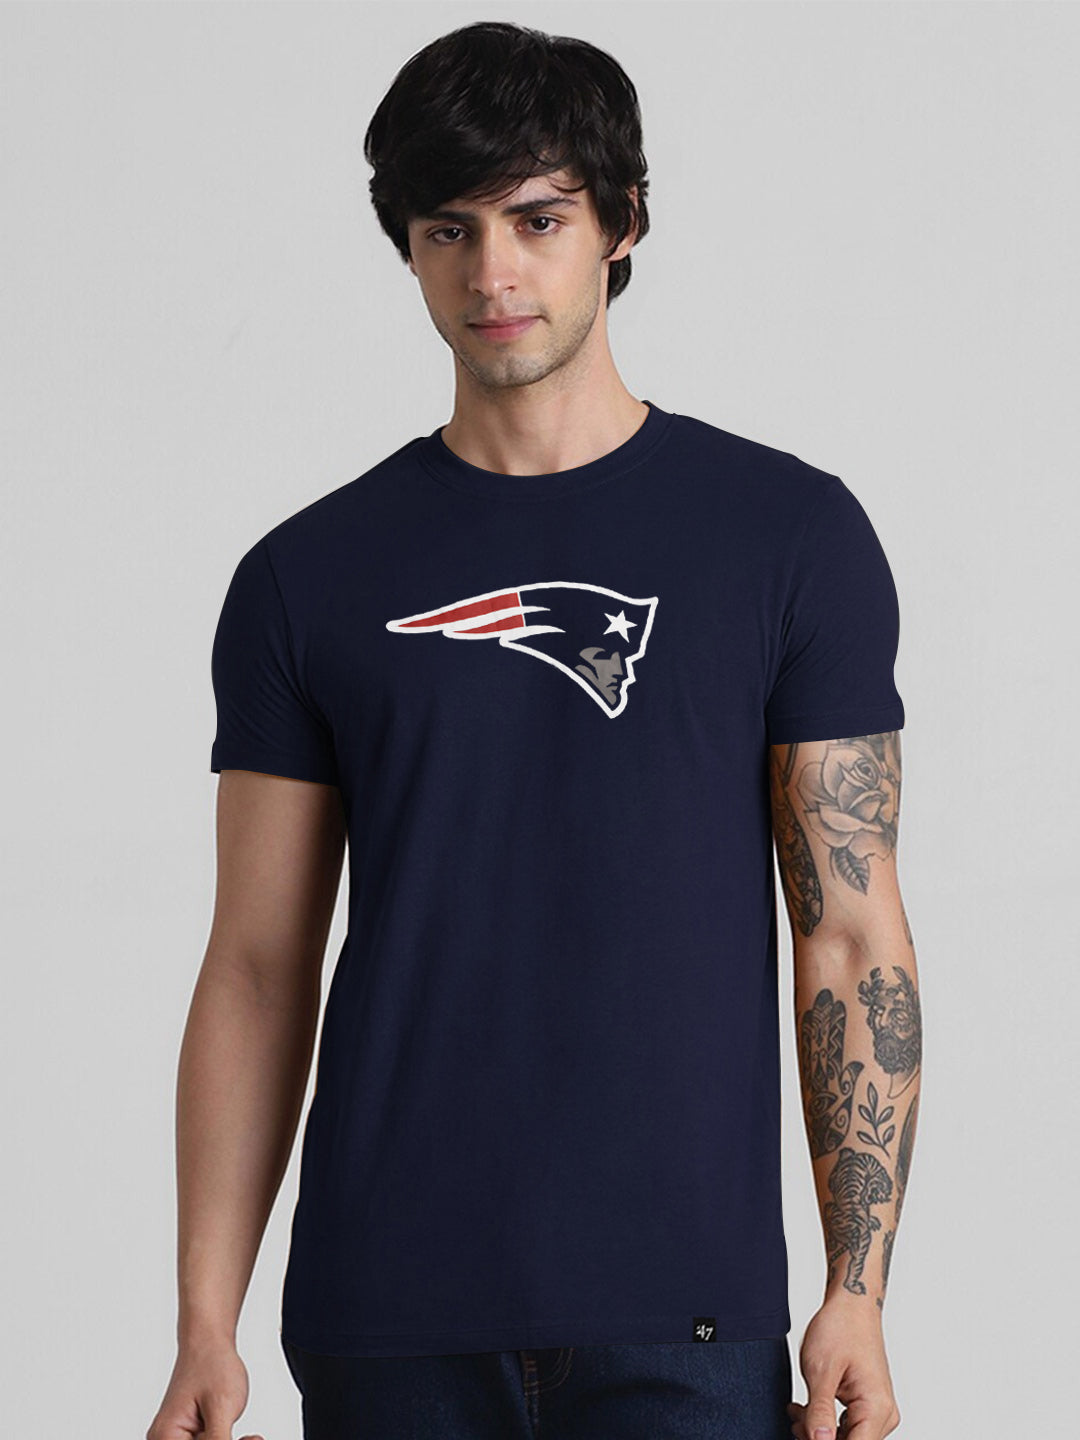 47 Crew Neck Half Sleeve Tee Shirt For Men-Navy with Print-BE1106